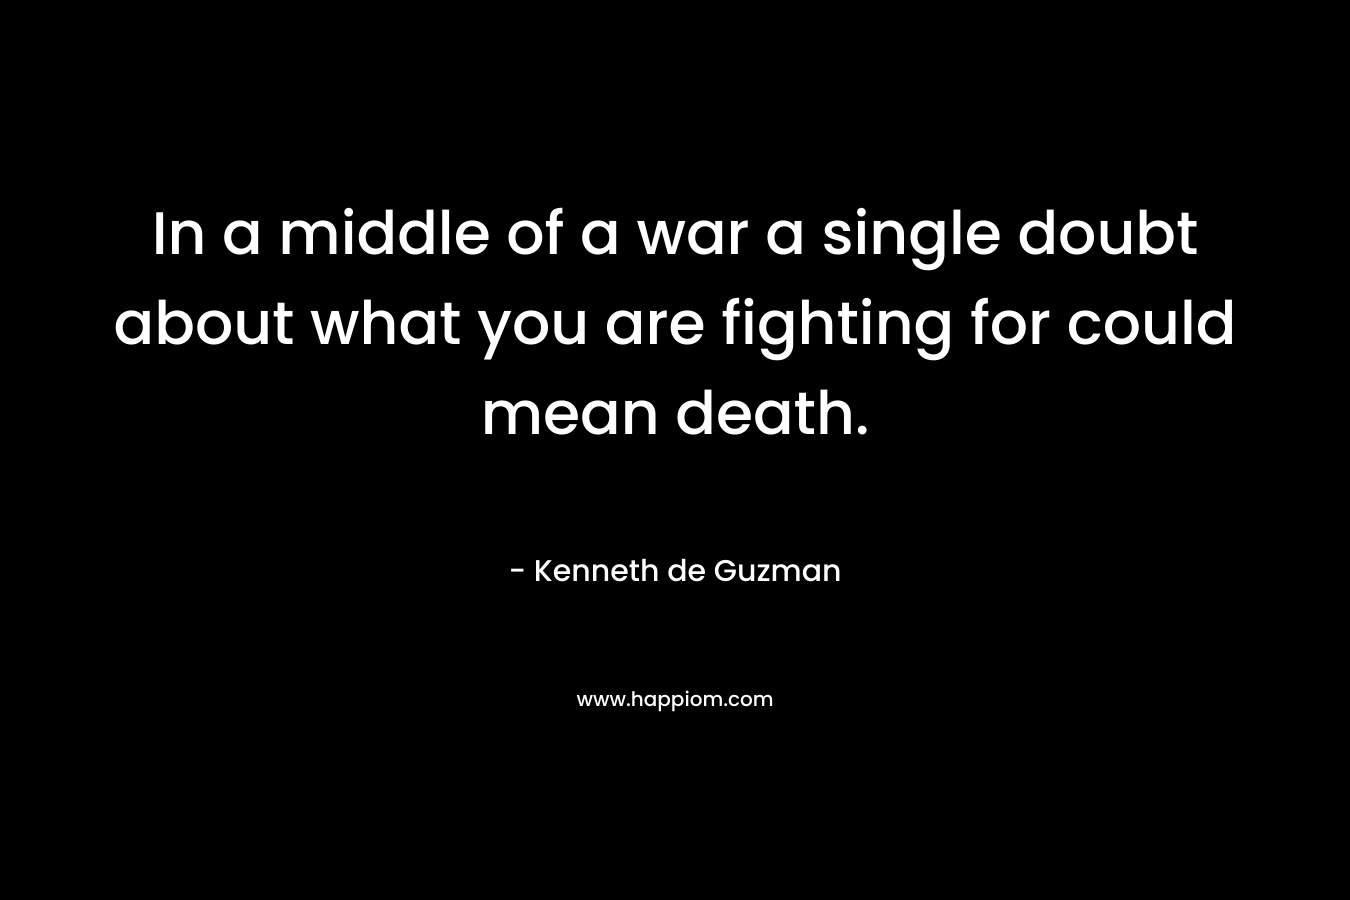 In a middle of a war a single doubt about what you are fighting for could mean death. – Kenneth de Guzman